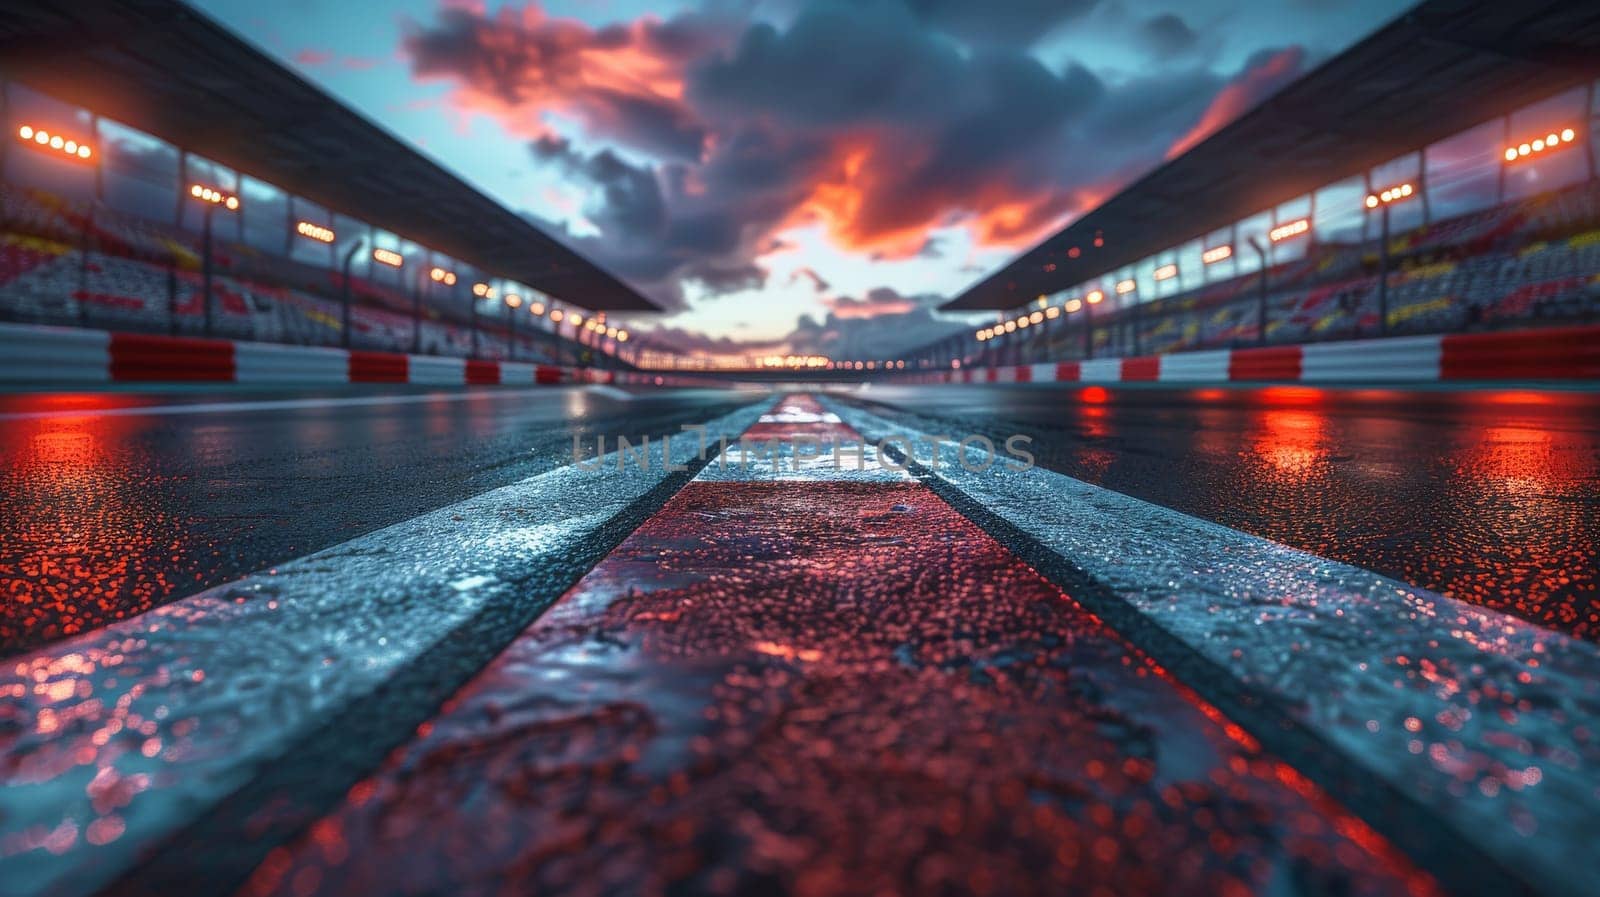 A race track with a red line on the ground. The track is wet and the sky is cloudy